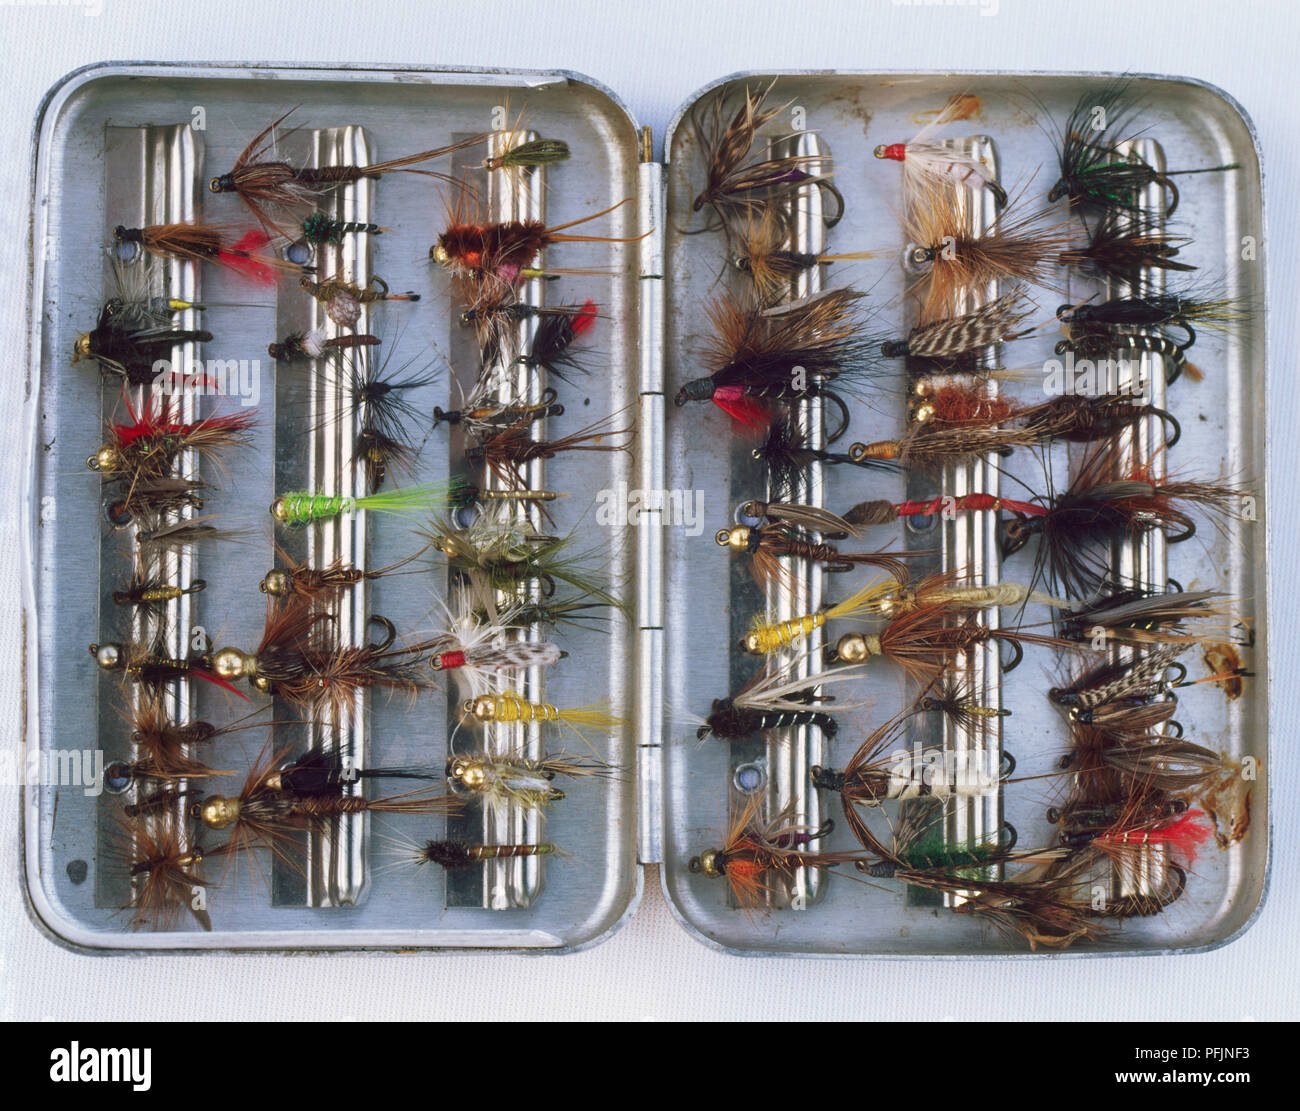 https://c8.alamy.com/comp/PFJNF3/fly-fishing-selection-of-wet-flies-contained-in-metal-box-PFJNF3.jpg